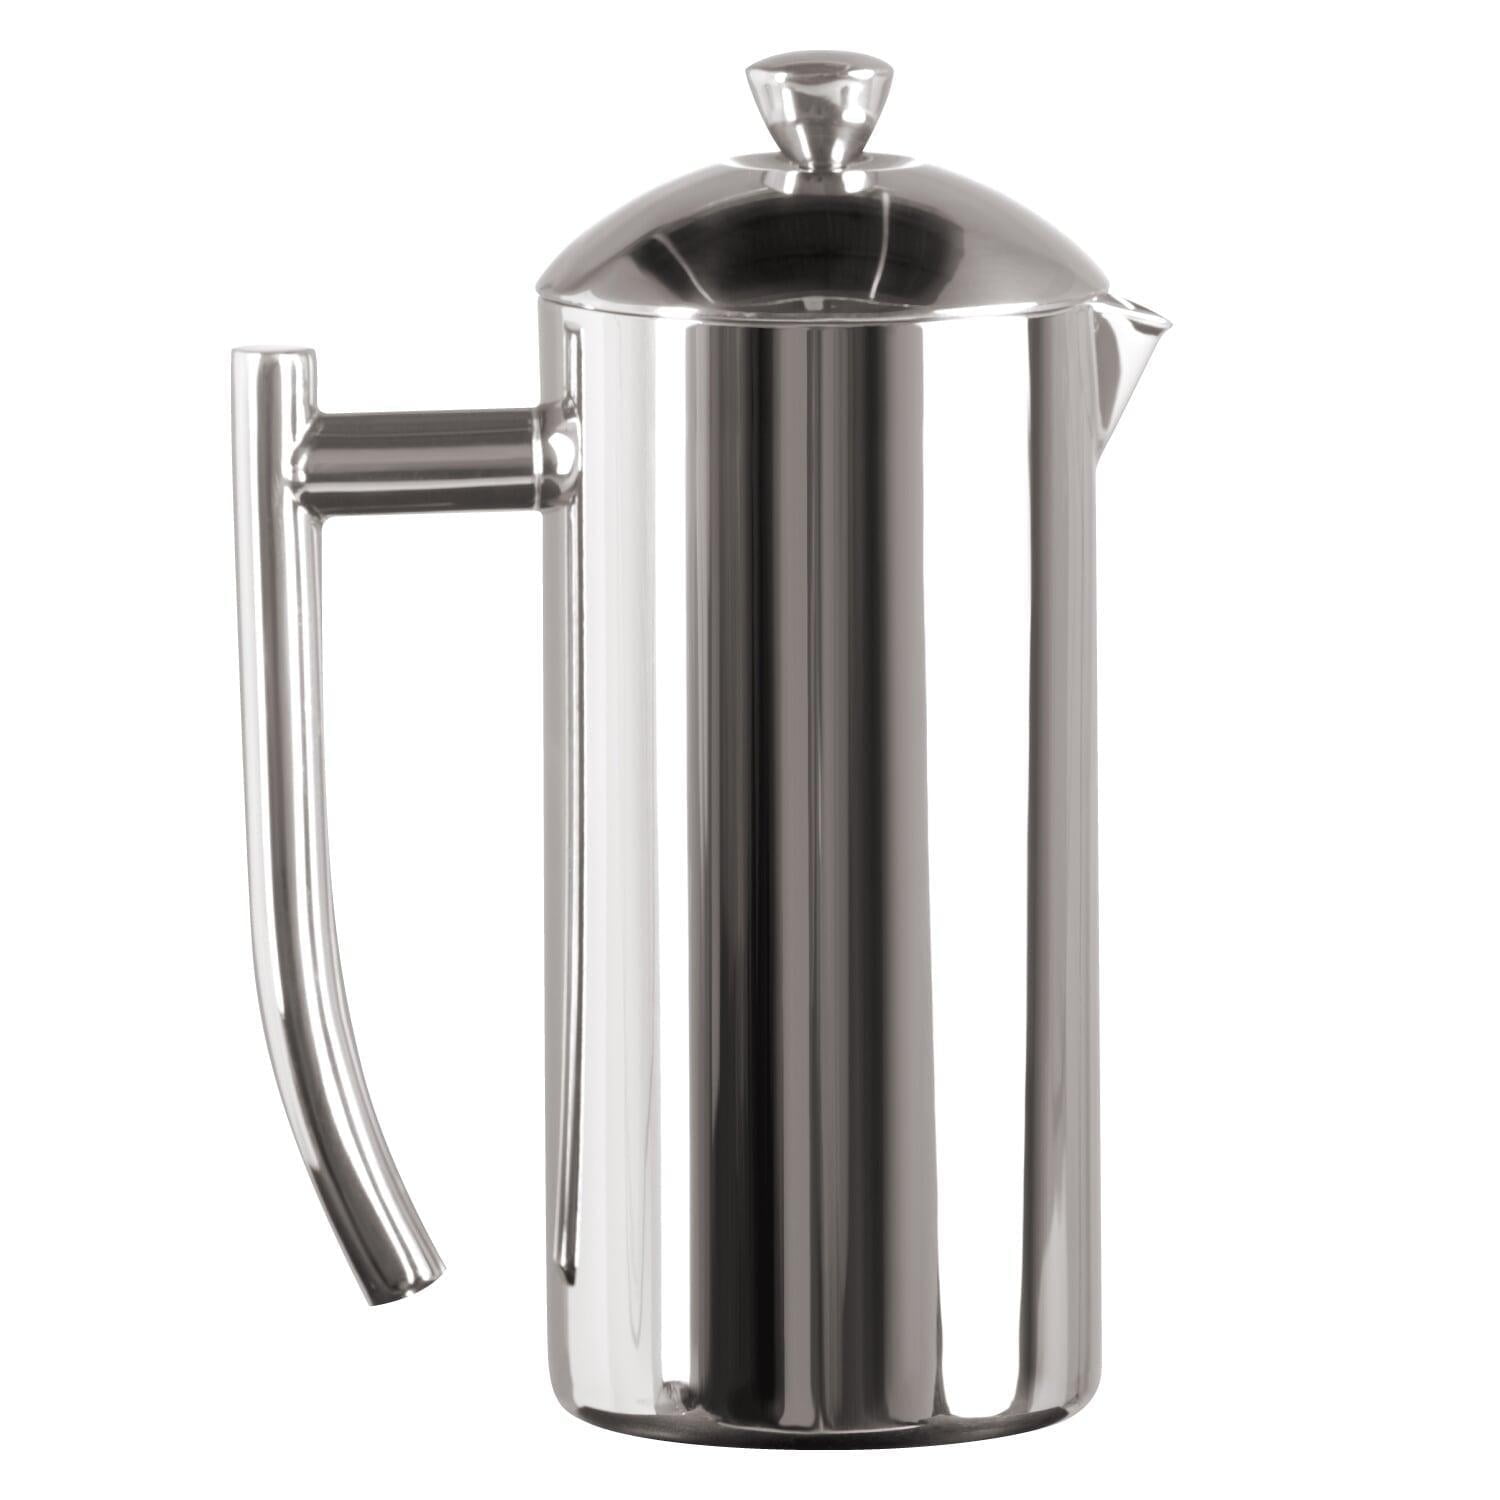  Meelio Stainless Steel French Press Coffee Maker, Double-Wall  Insulated Large French Coffee Press with 2 Extra Screens, 50 Ounce, Silver:  Home & Kitchen